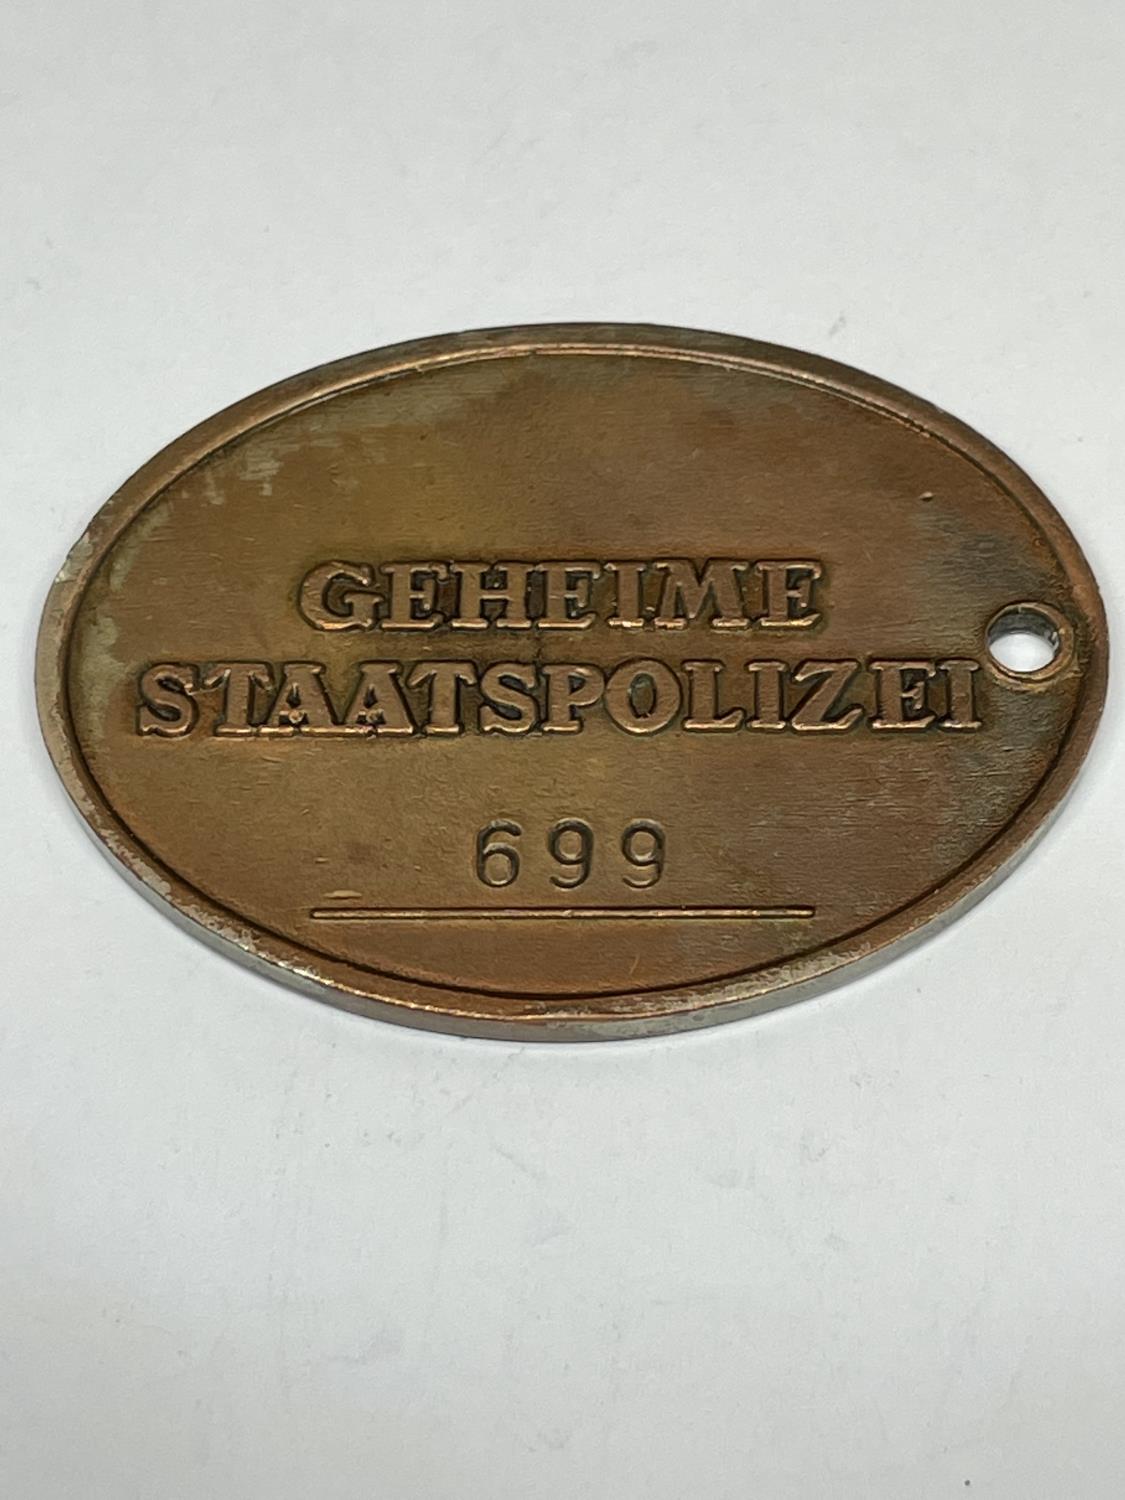 A GERMAN STYLE TAG GEHEIME STAATSPOLIZEI 699 - Image 2 of 2